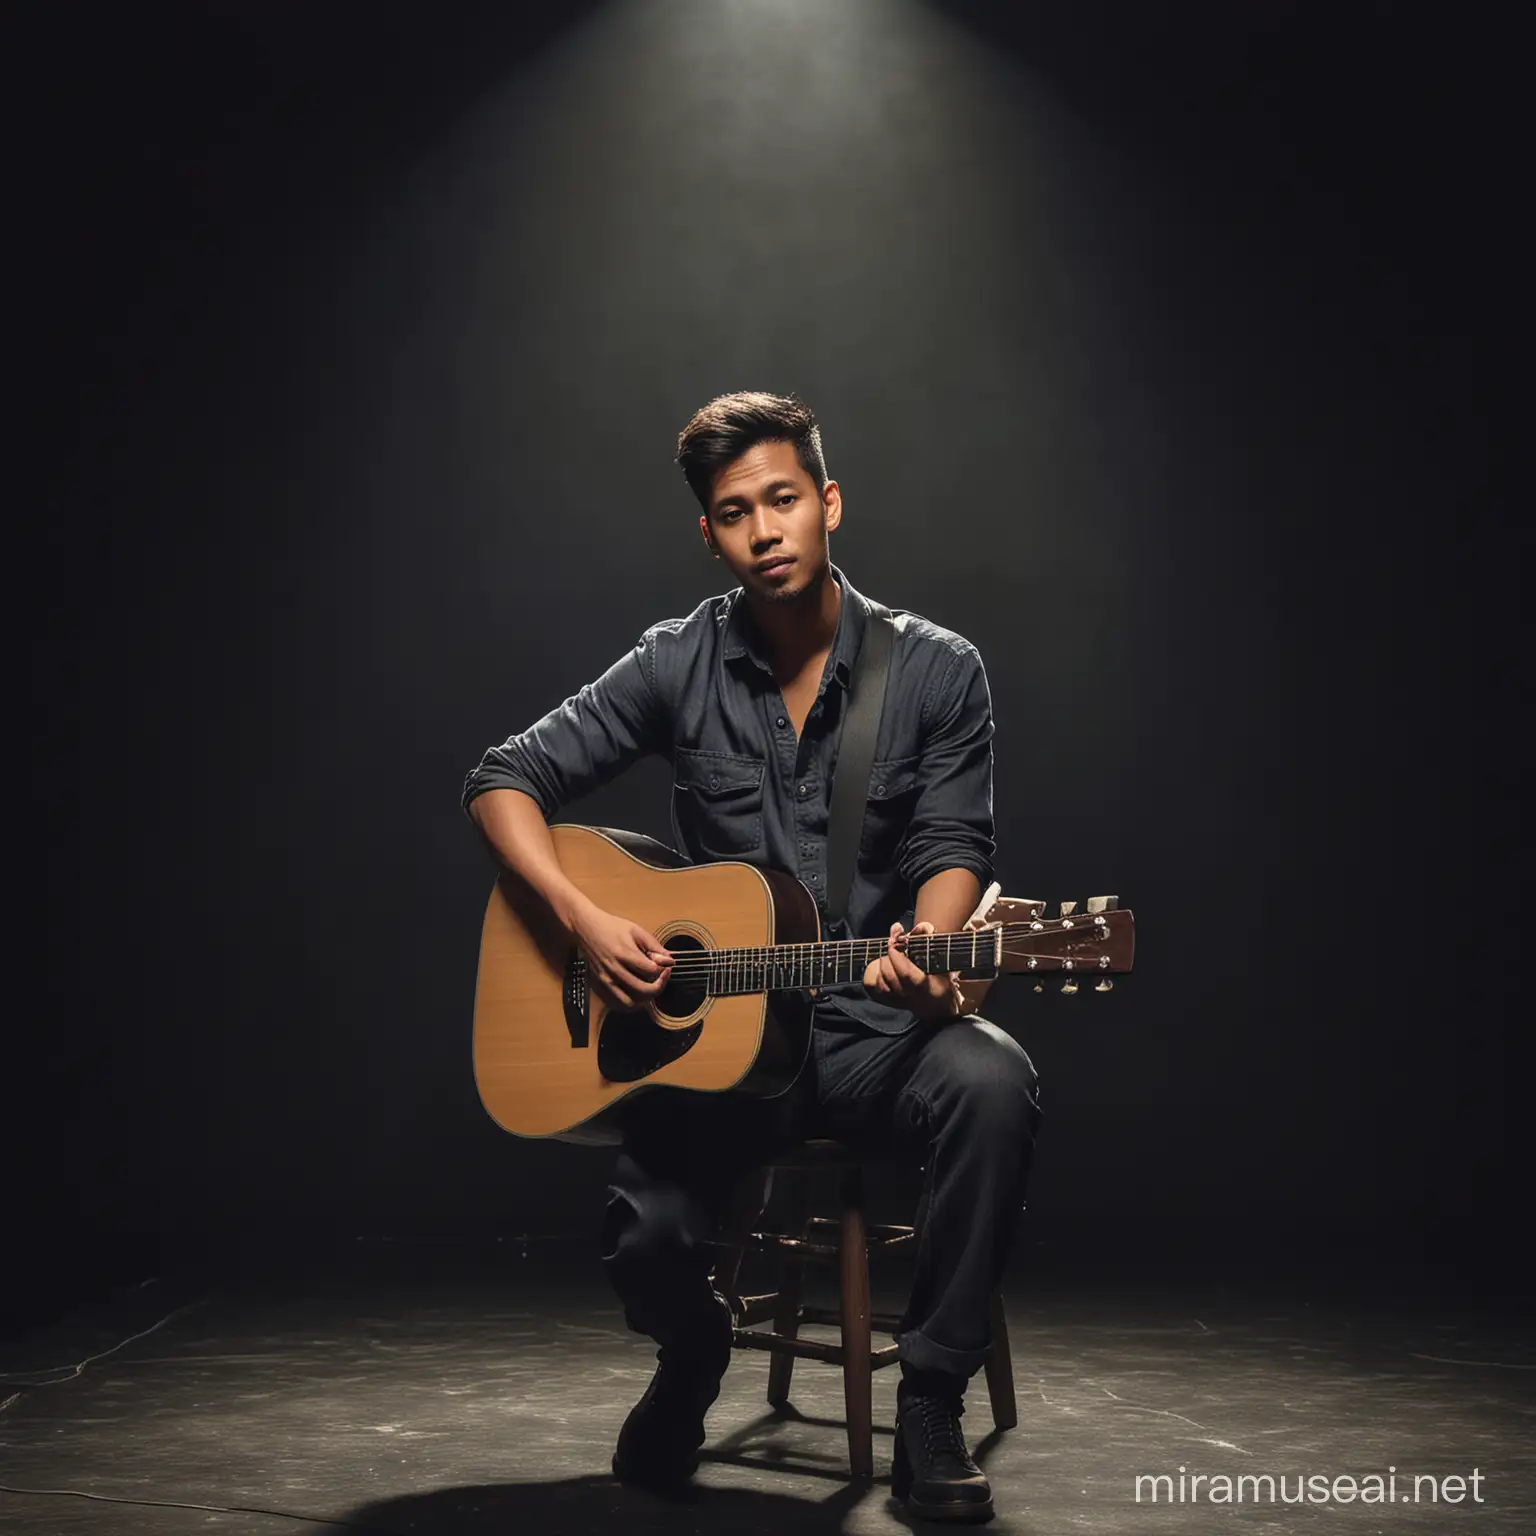 Indonesian Singer Songwriter Performing with Acoustic Guitar on Dark Stage